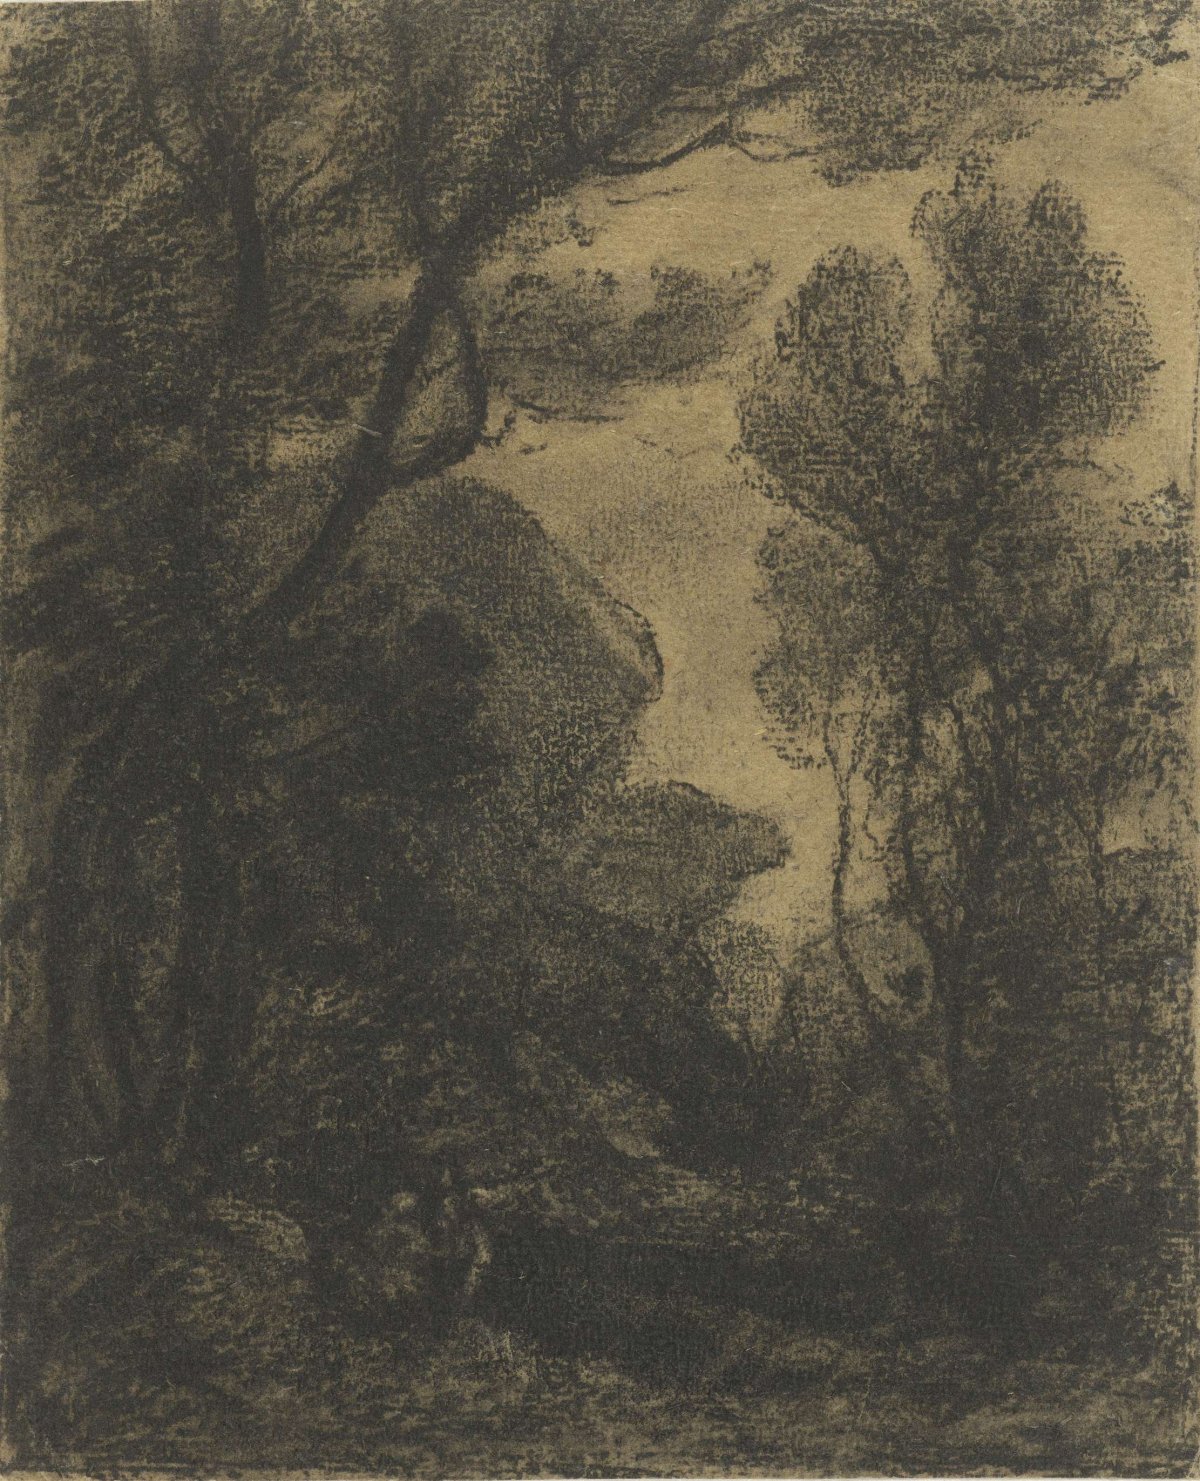 Forest scene at night, Camille Corot, 1806 - 1875